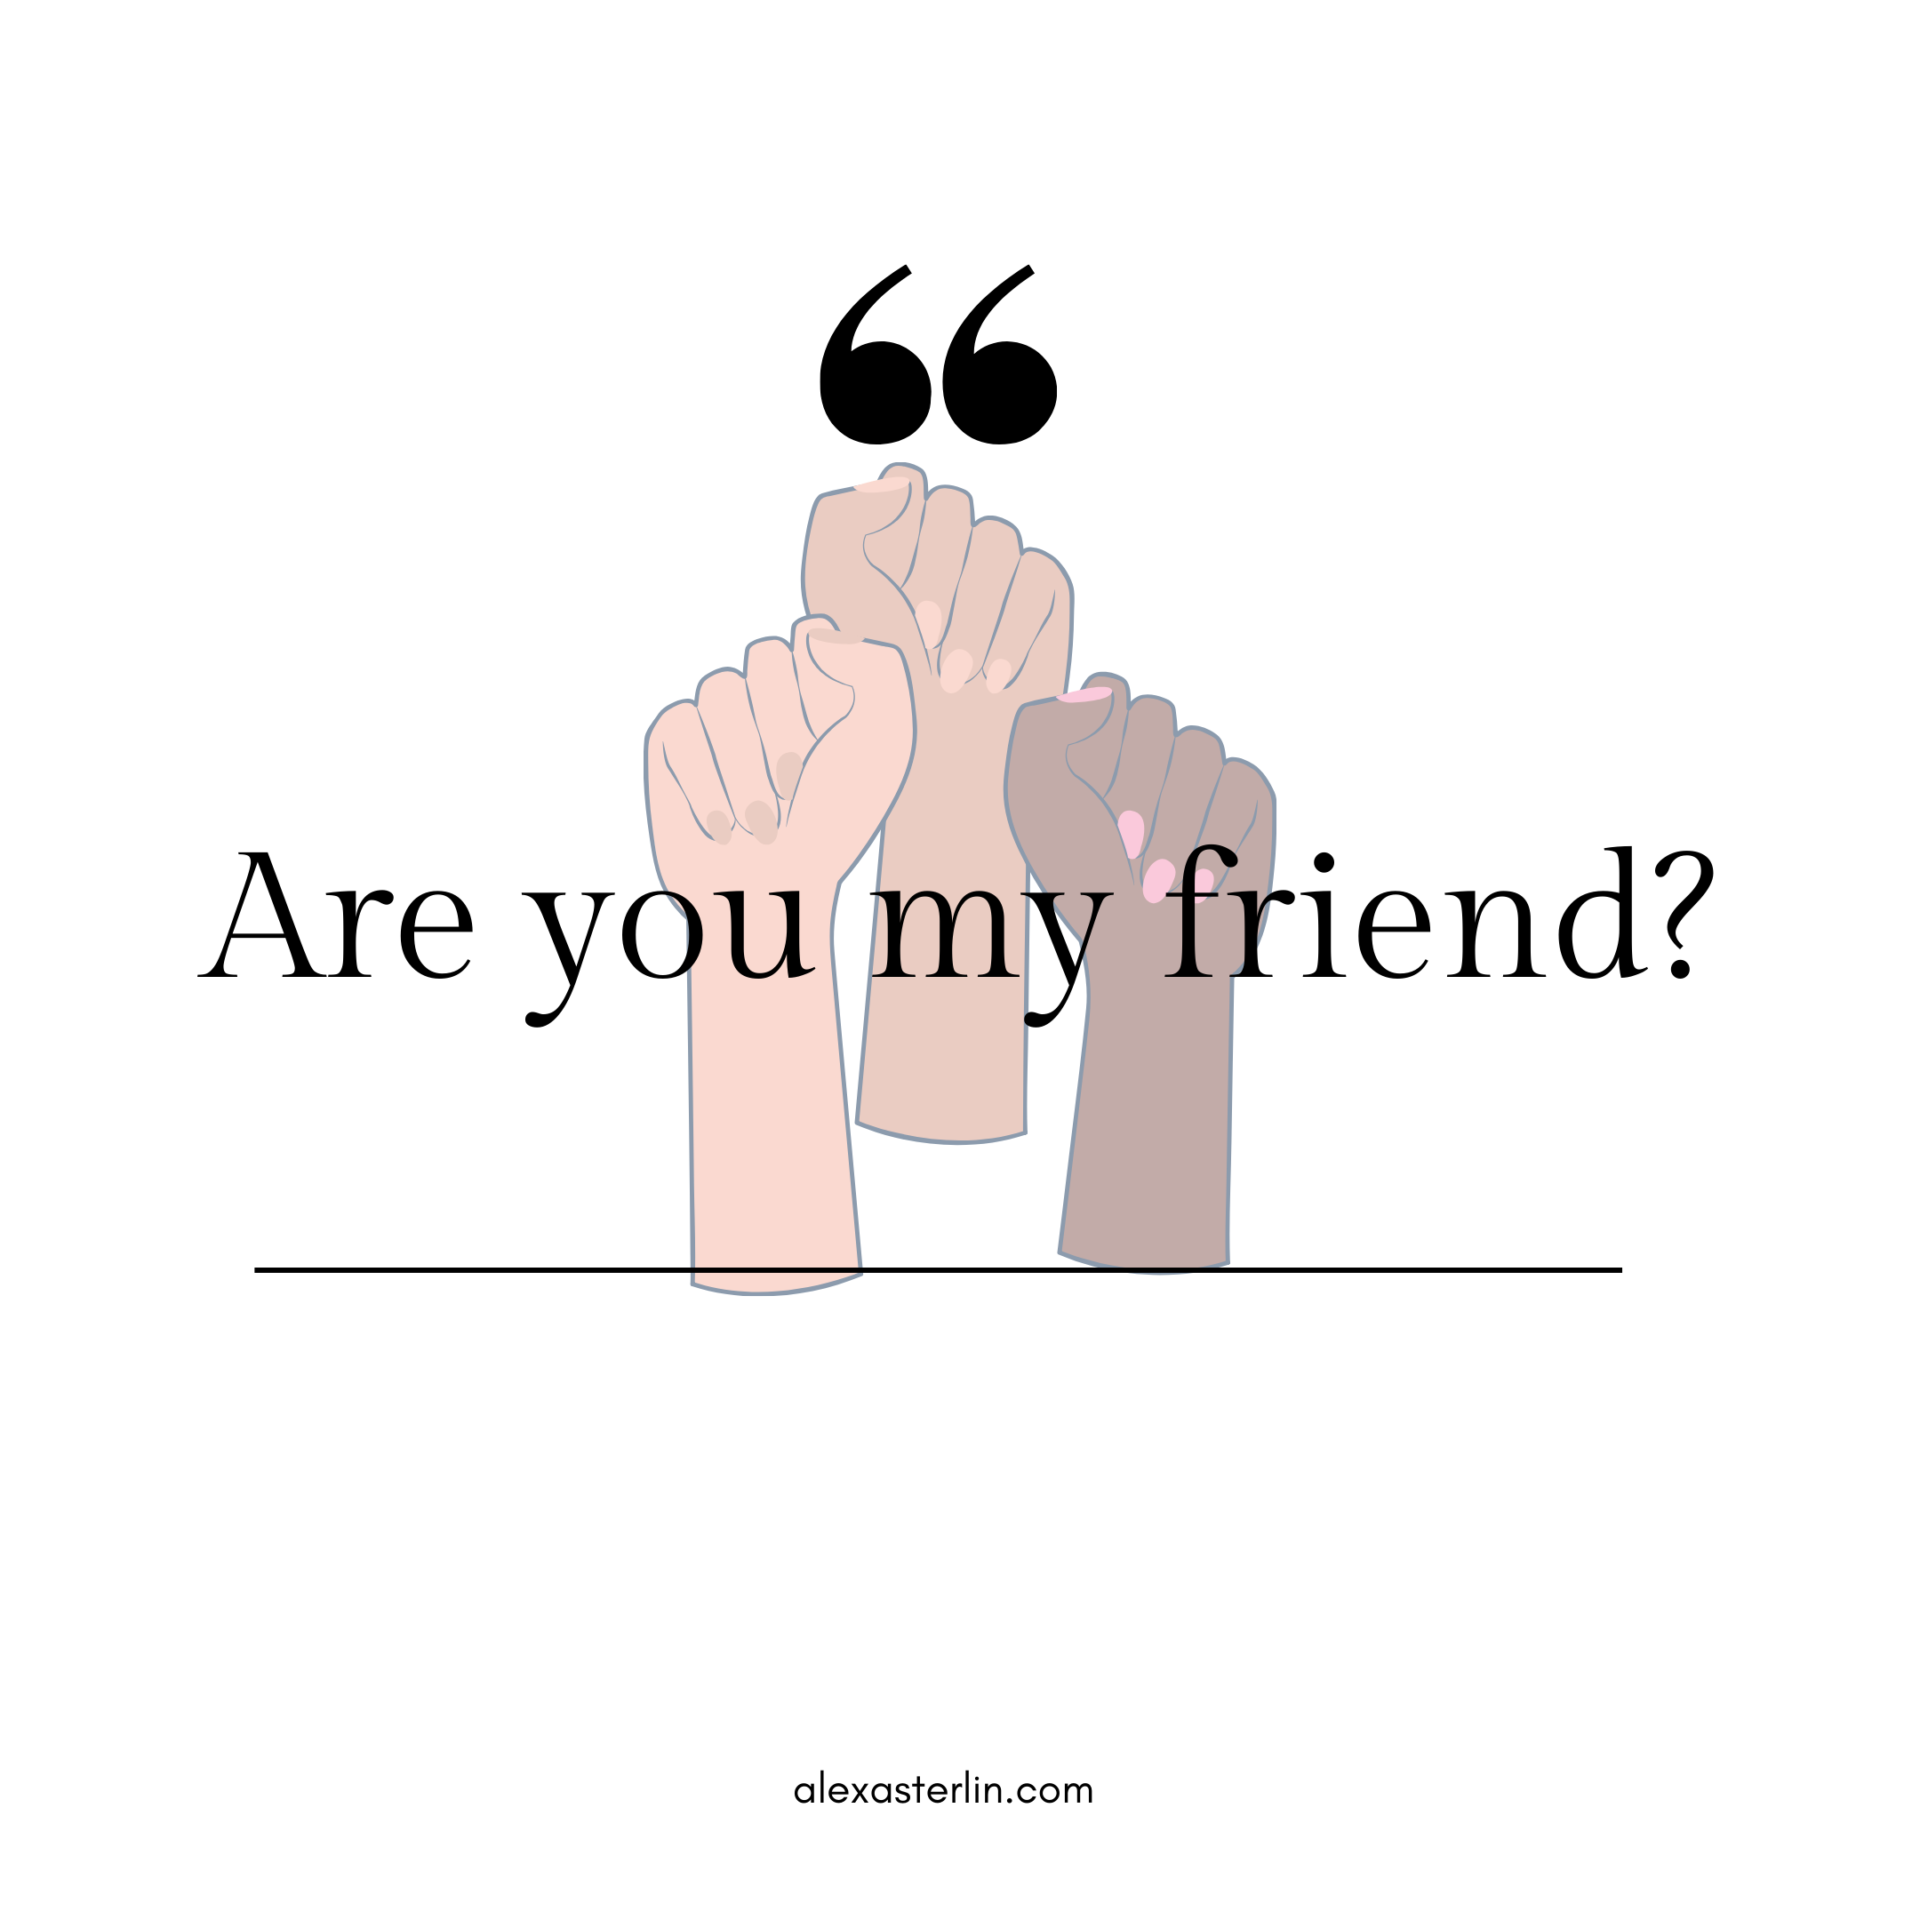 Are You My Friend?